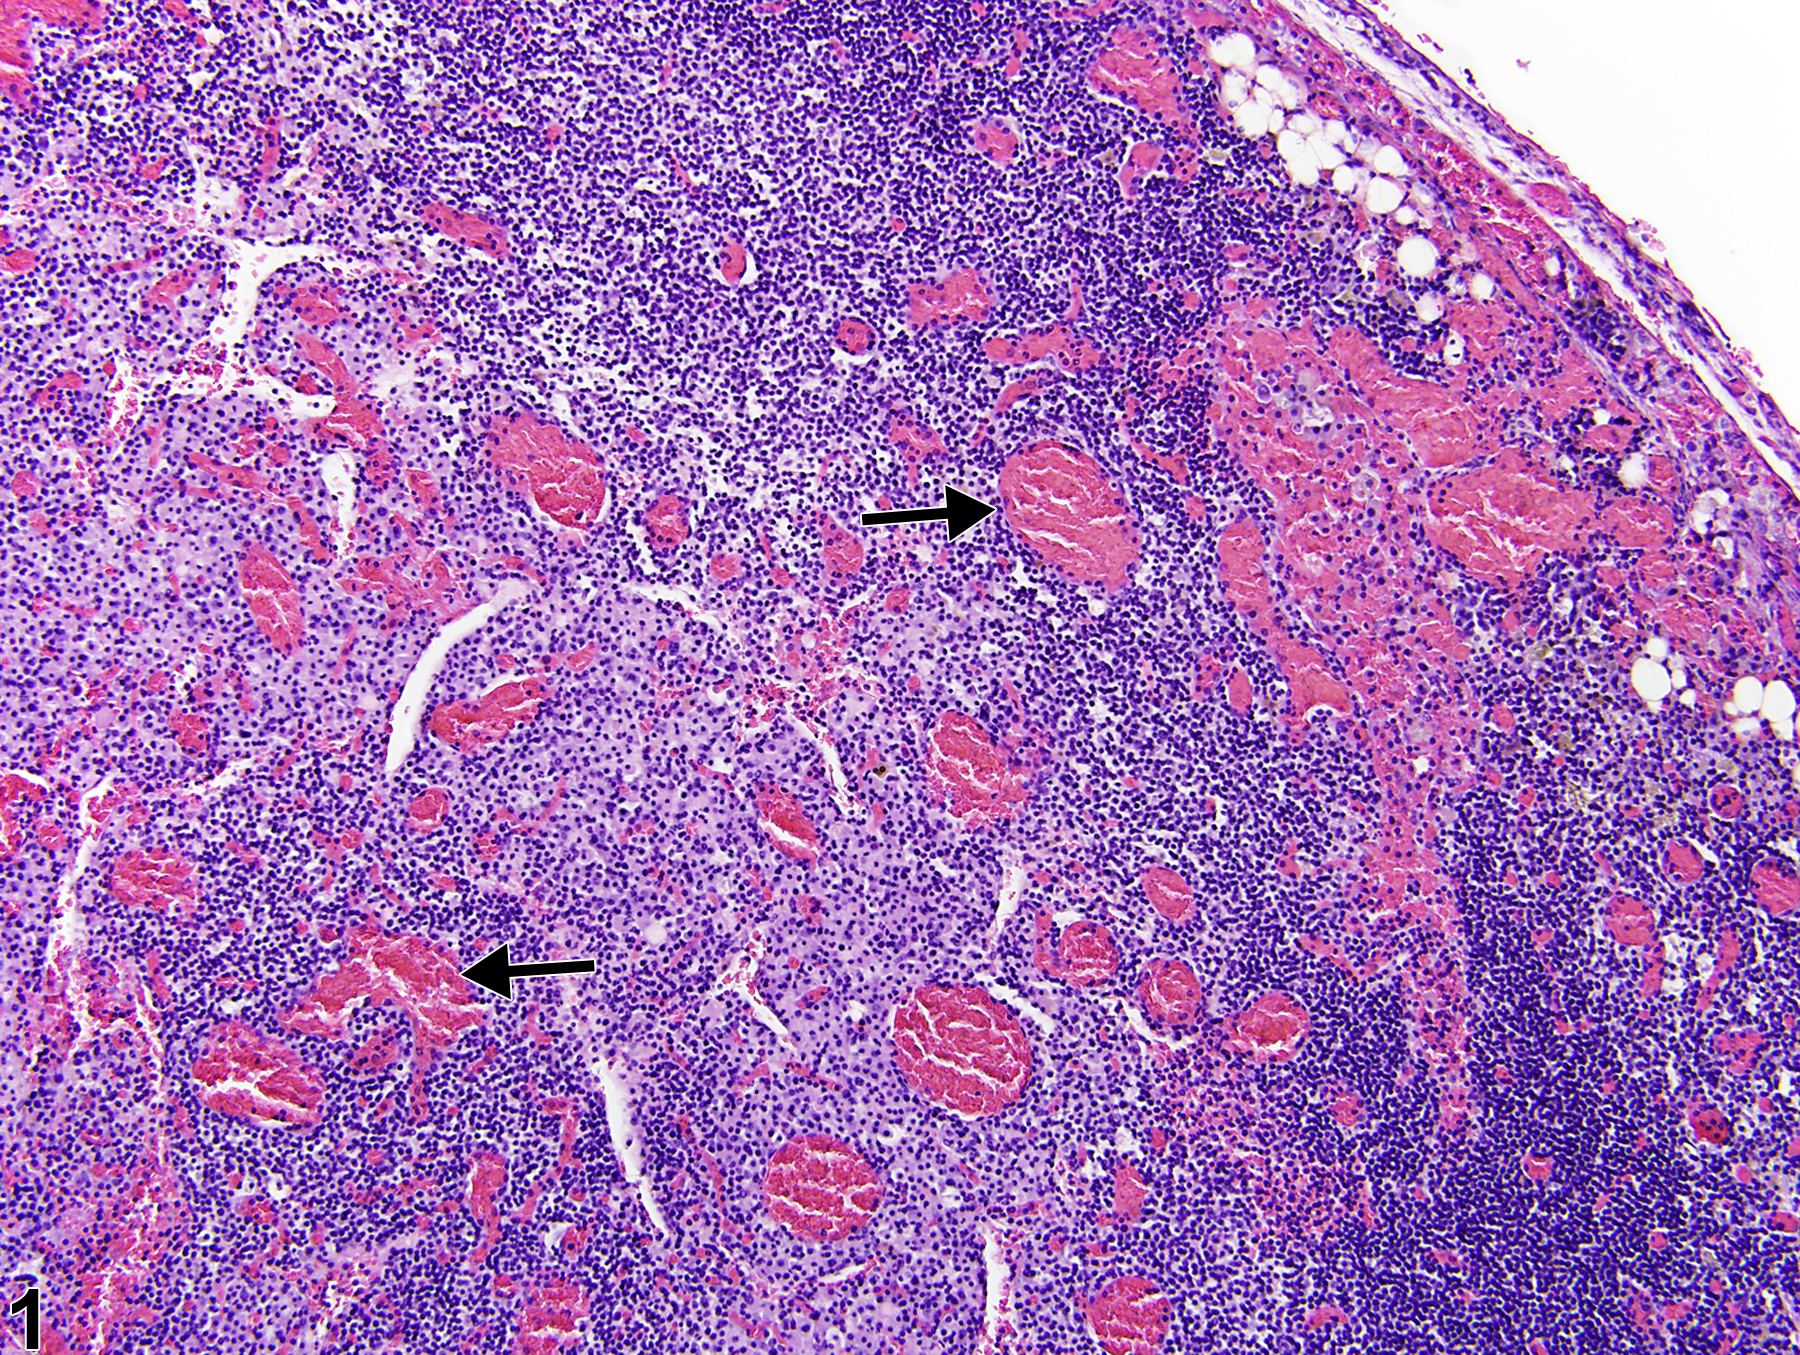 Image of congestion in the lymph node from a female B6C3F1/N mouse in a chronic study